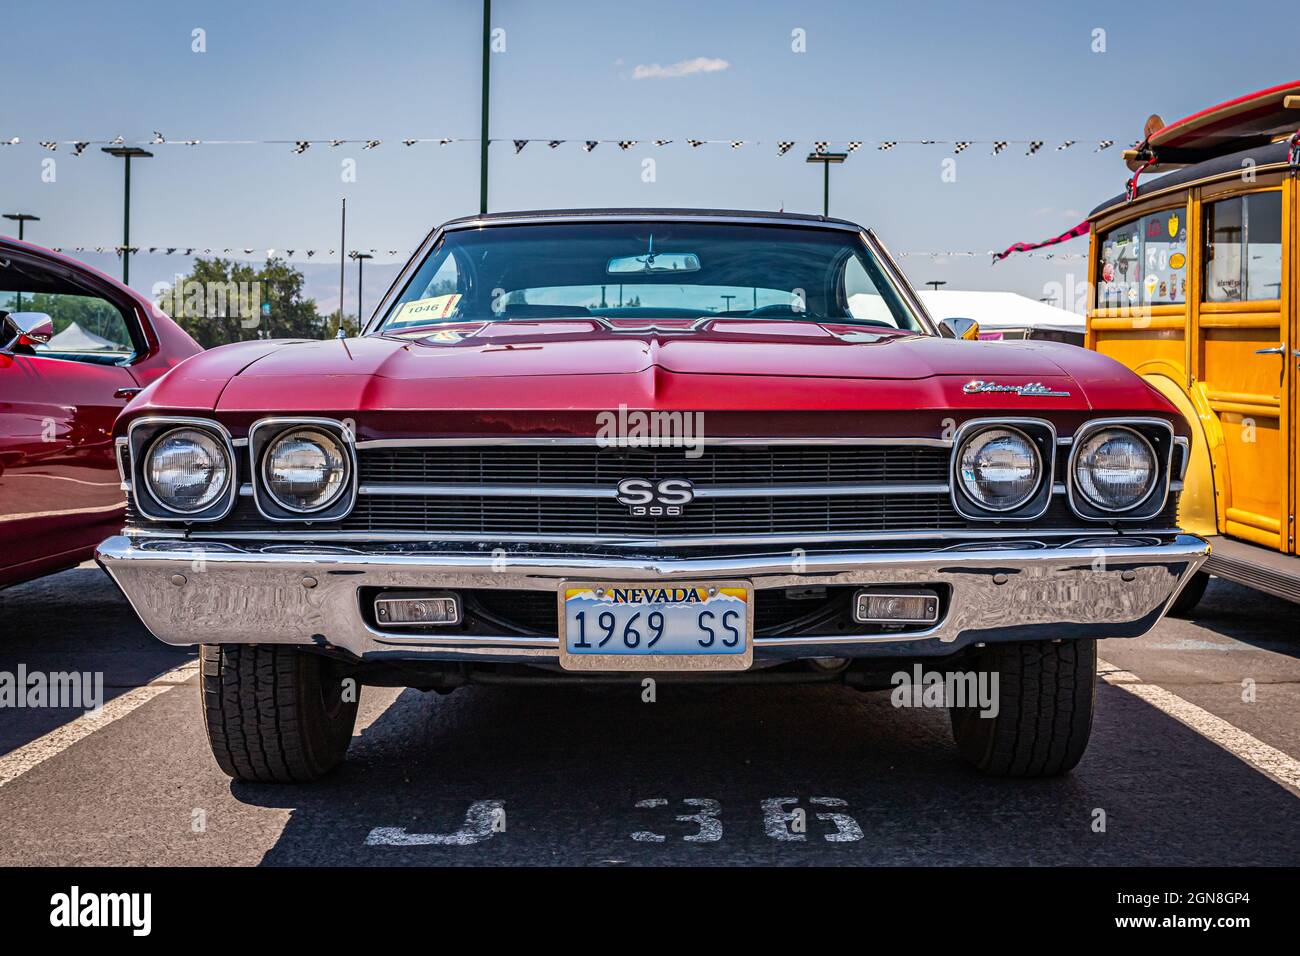 Reno, NV - August 3, 2021: 1969 Chevrolet Chevelle SS Hardtop Coupe at a local car show. Stock Photo